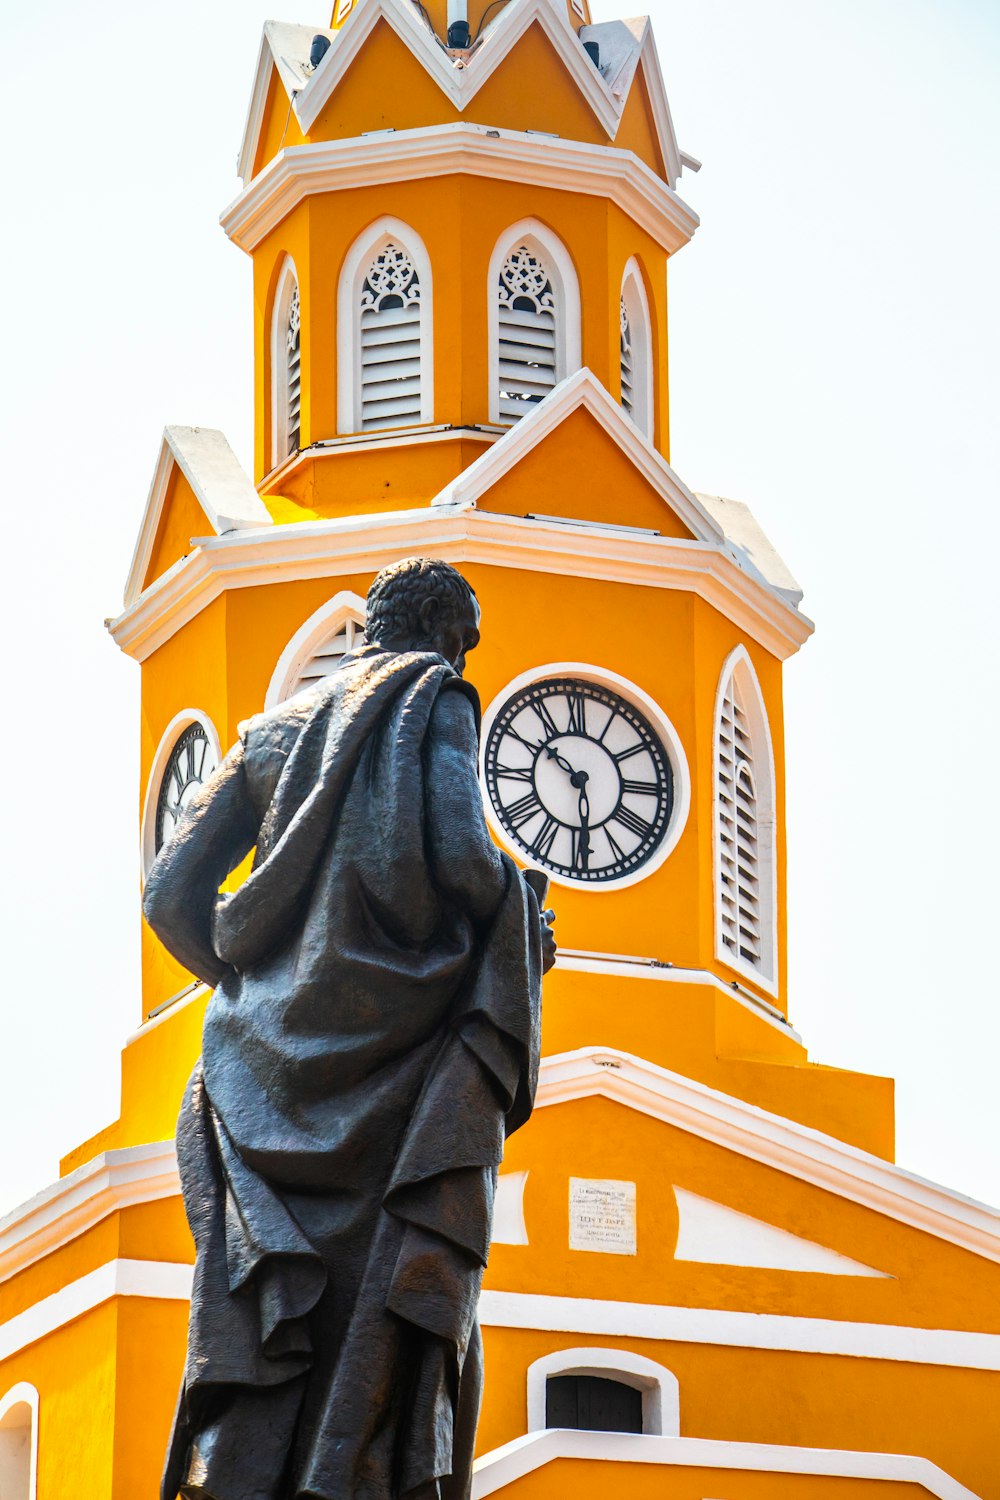 a statue of a man standing in front of a clock tower